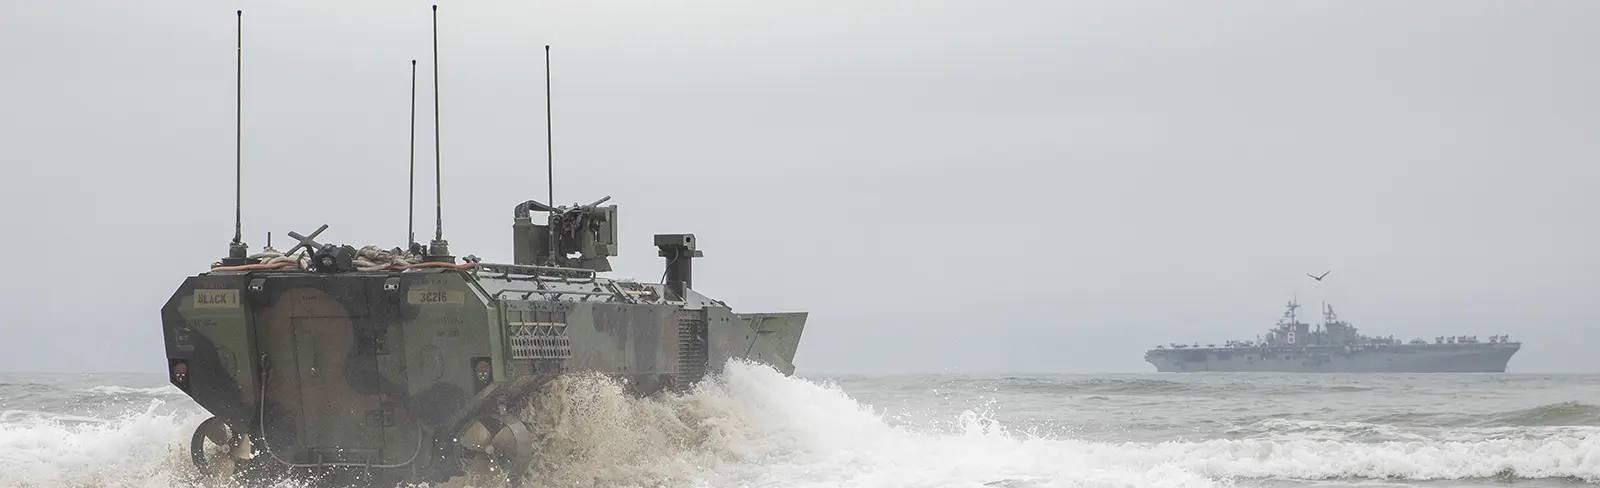 U.S. Marine Corps orders more Amphibious Combat Vehicles from BAE Systems